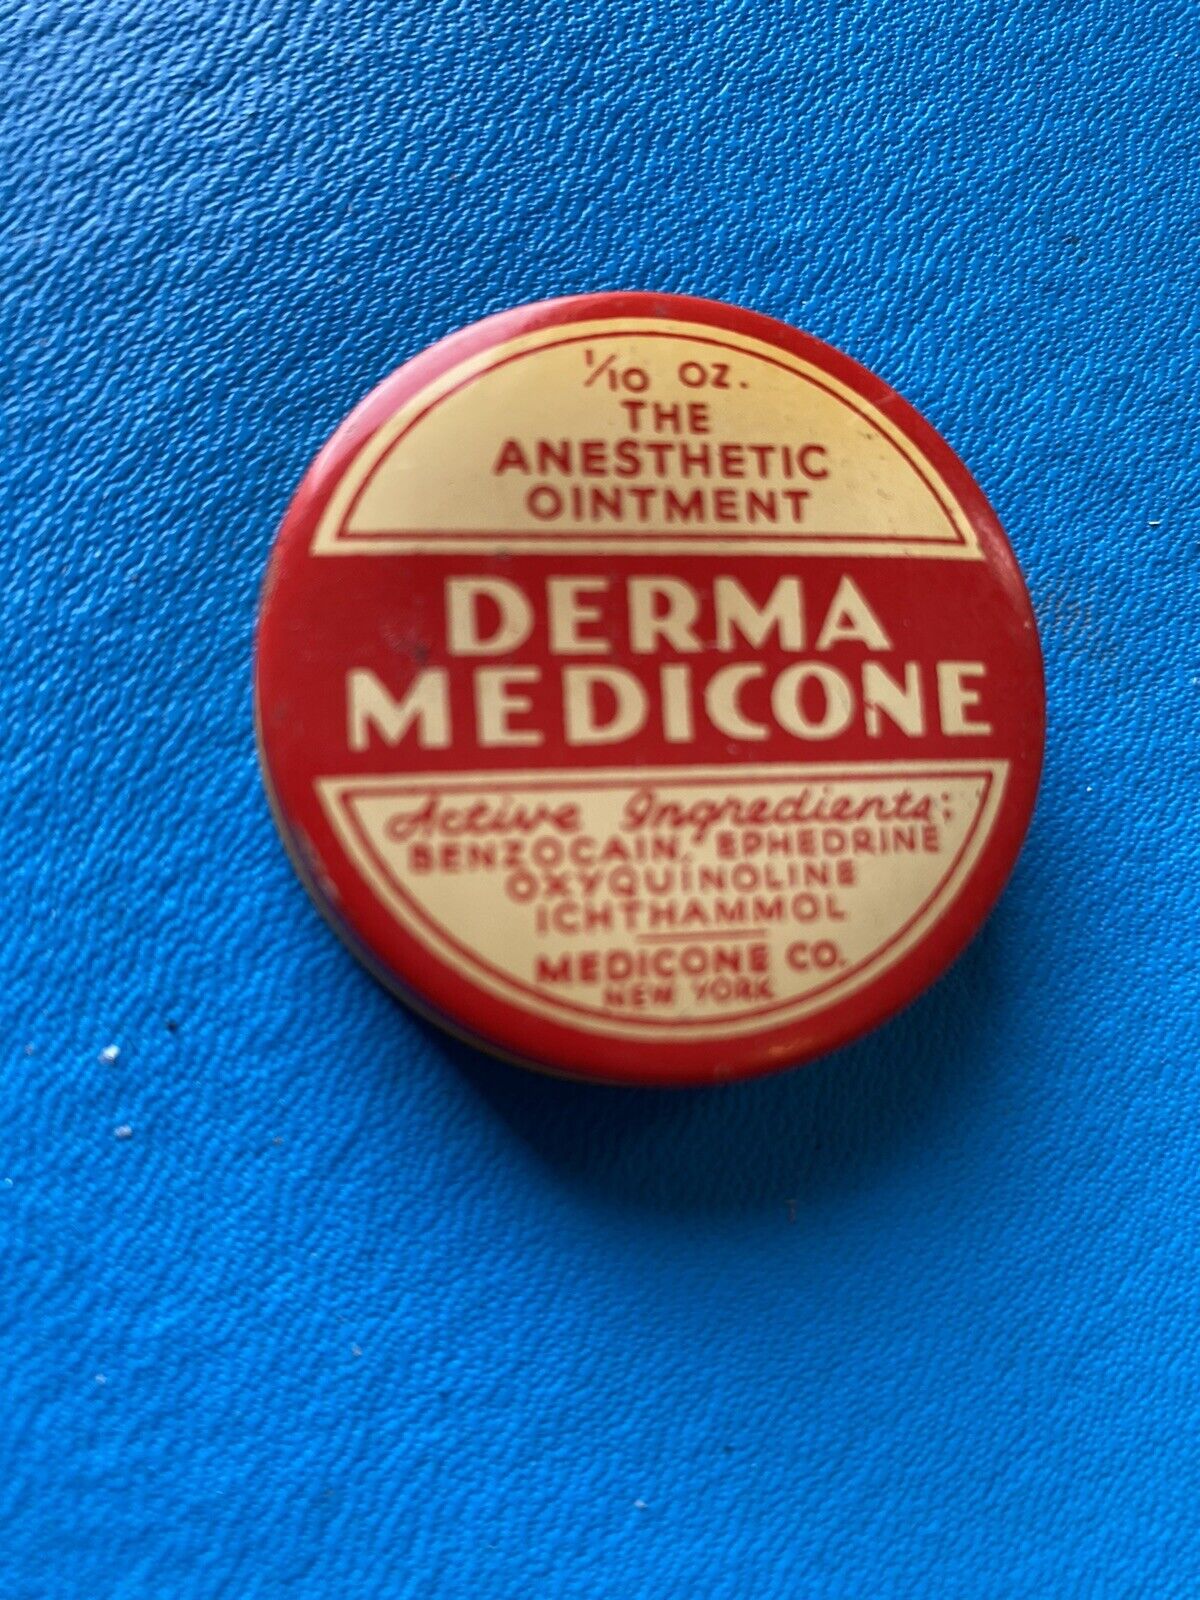 Vintage Derma Medicone Anesthetic Ointment Medical Advertising Tin New York